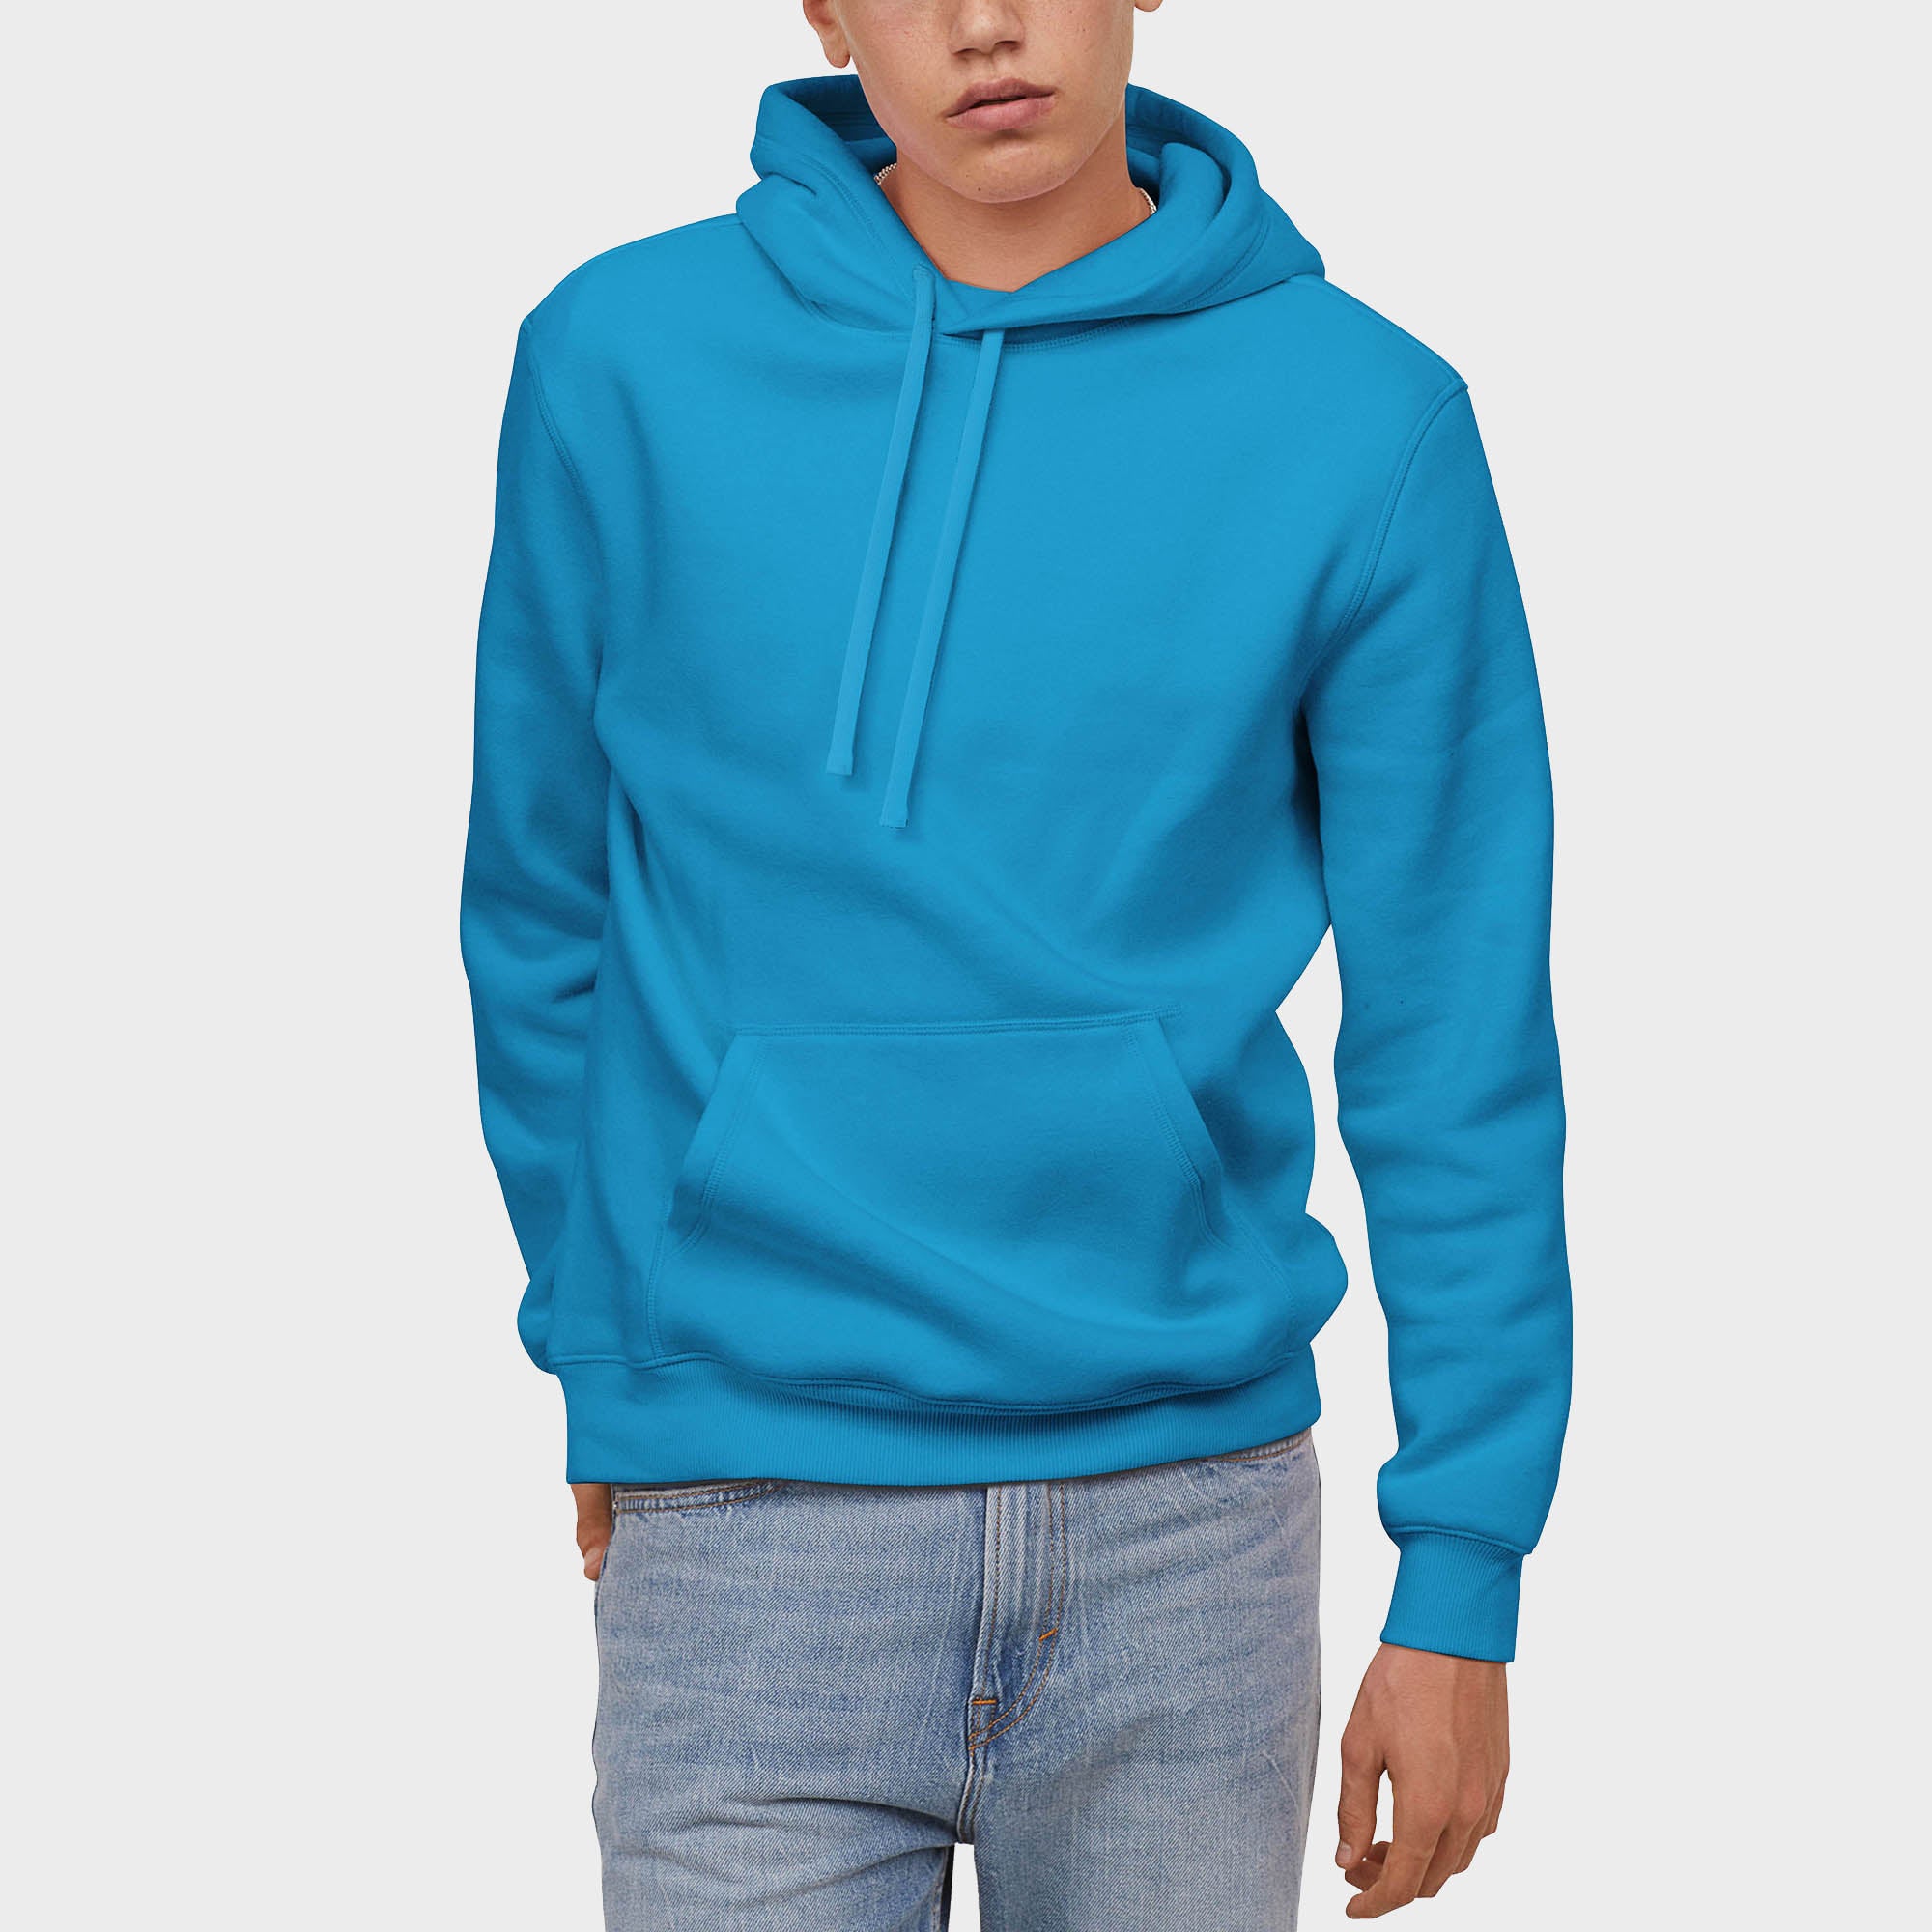 pullover hoodie_mens pullover hoodie_pullover sweatshirt_champion pullover hoodie_hooded pullover_heavyweight pullover hoodie_Turquoise